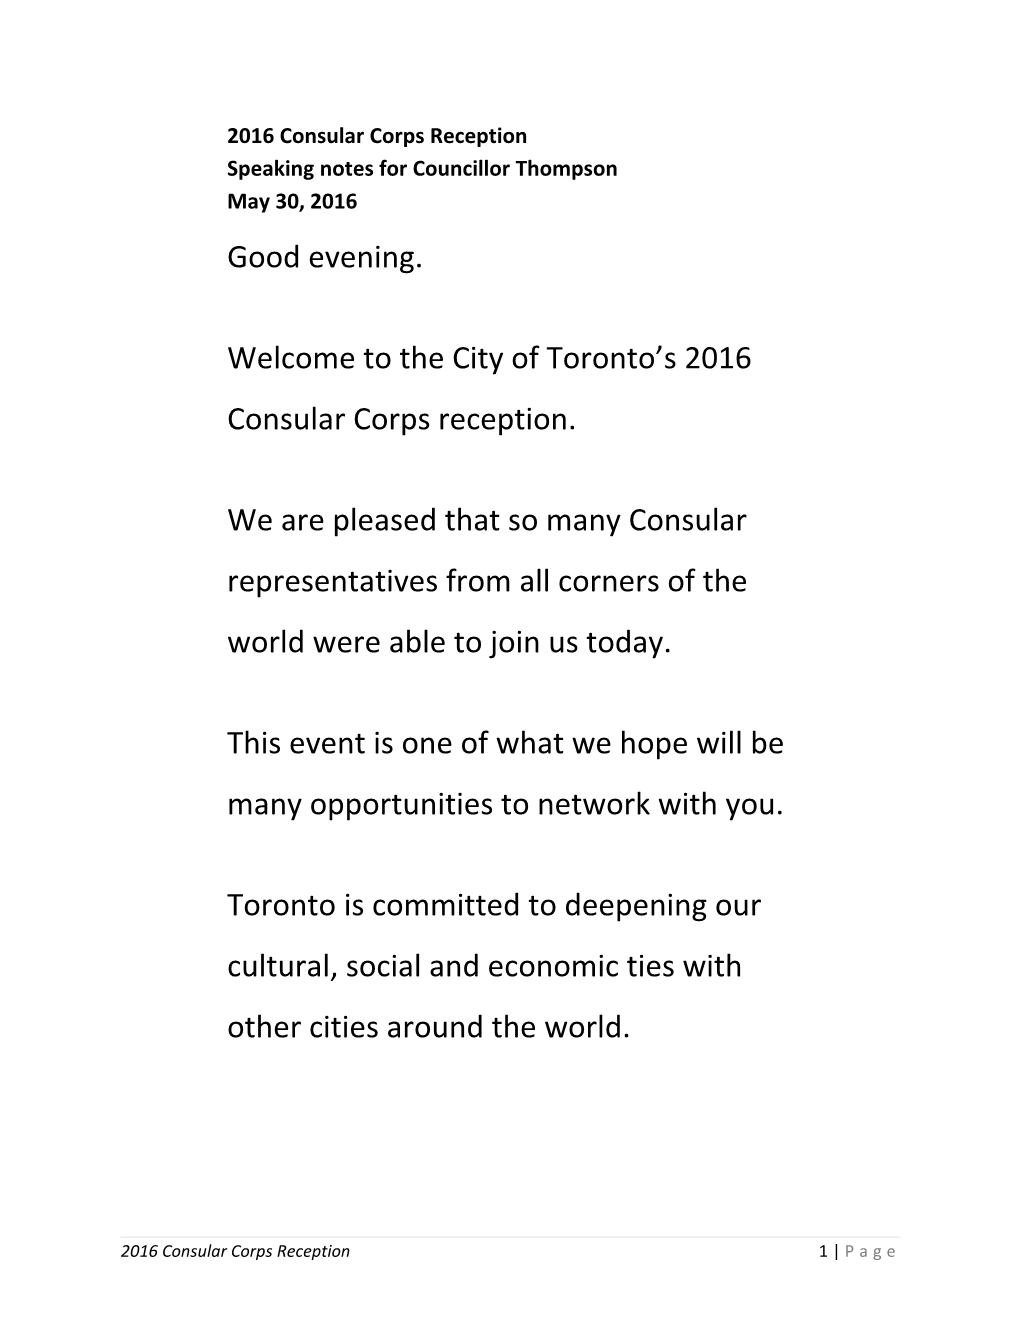 Welcome to the City of Toronto S 2016 Consular Corps Reception